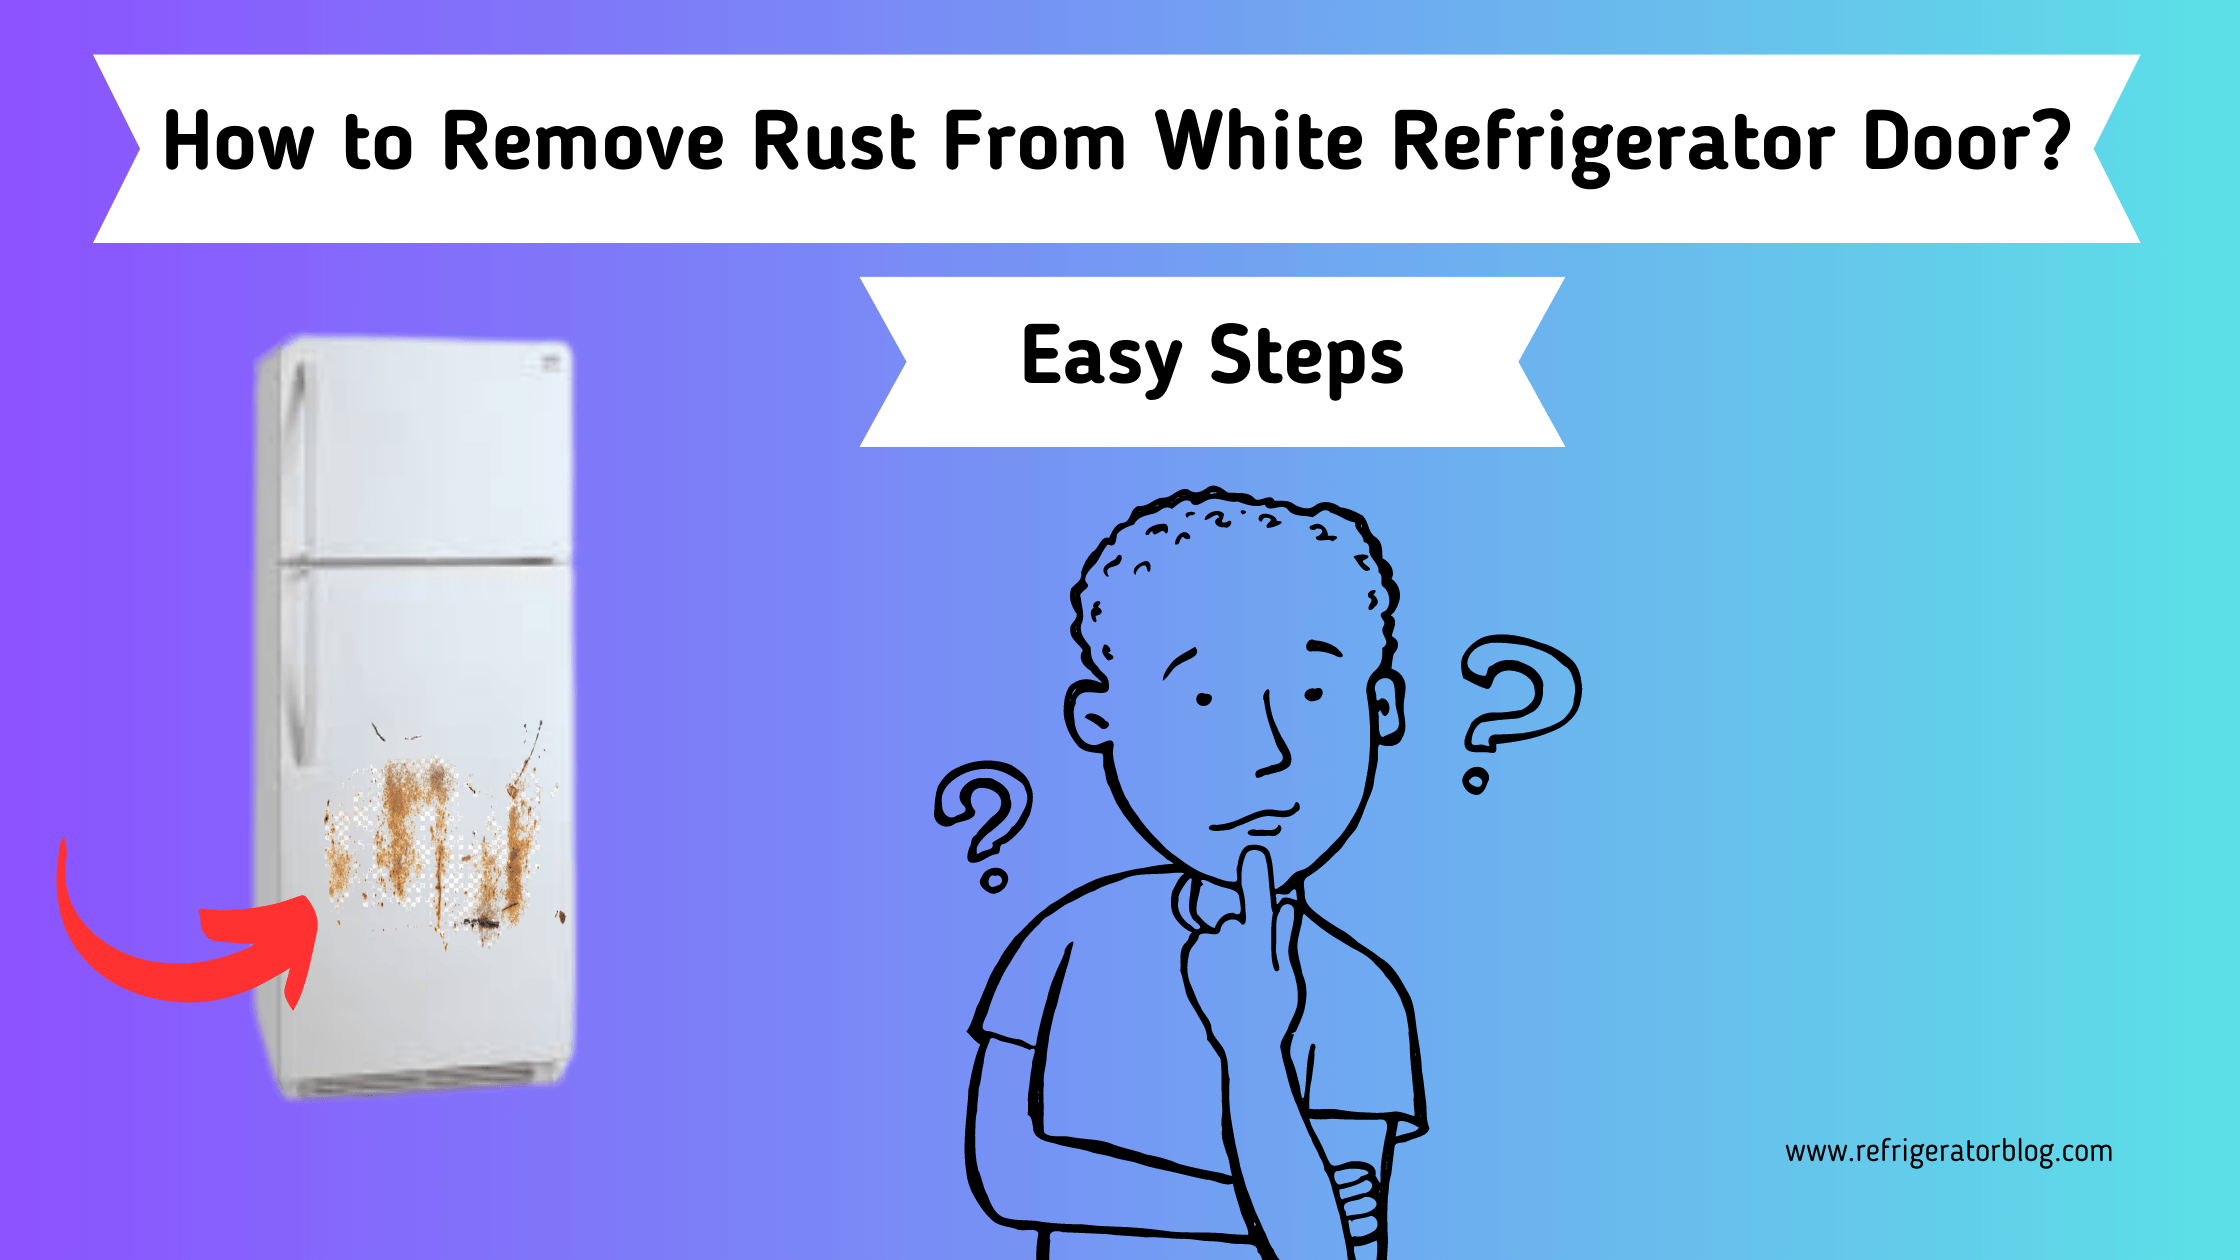 How to Remove Rust From White Refrigerator Door? Easy Steps